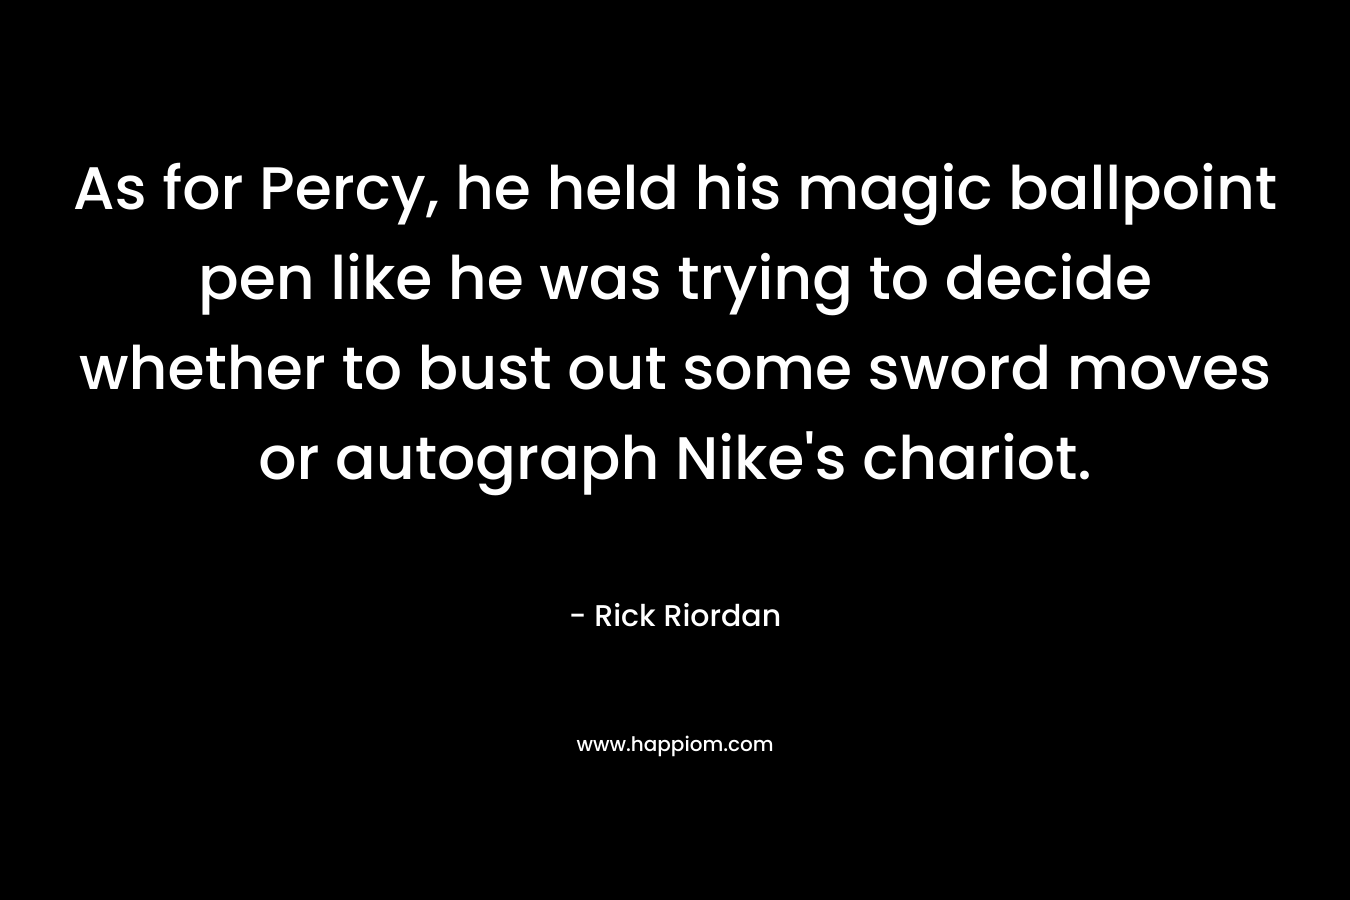 As for Percy, he held his magic ballpoint pen like he was trying to decide whether to bust out some sword moves or autograph Nike’s chariot. – Rick Riordan